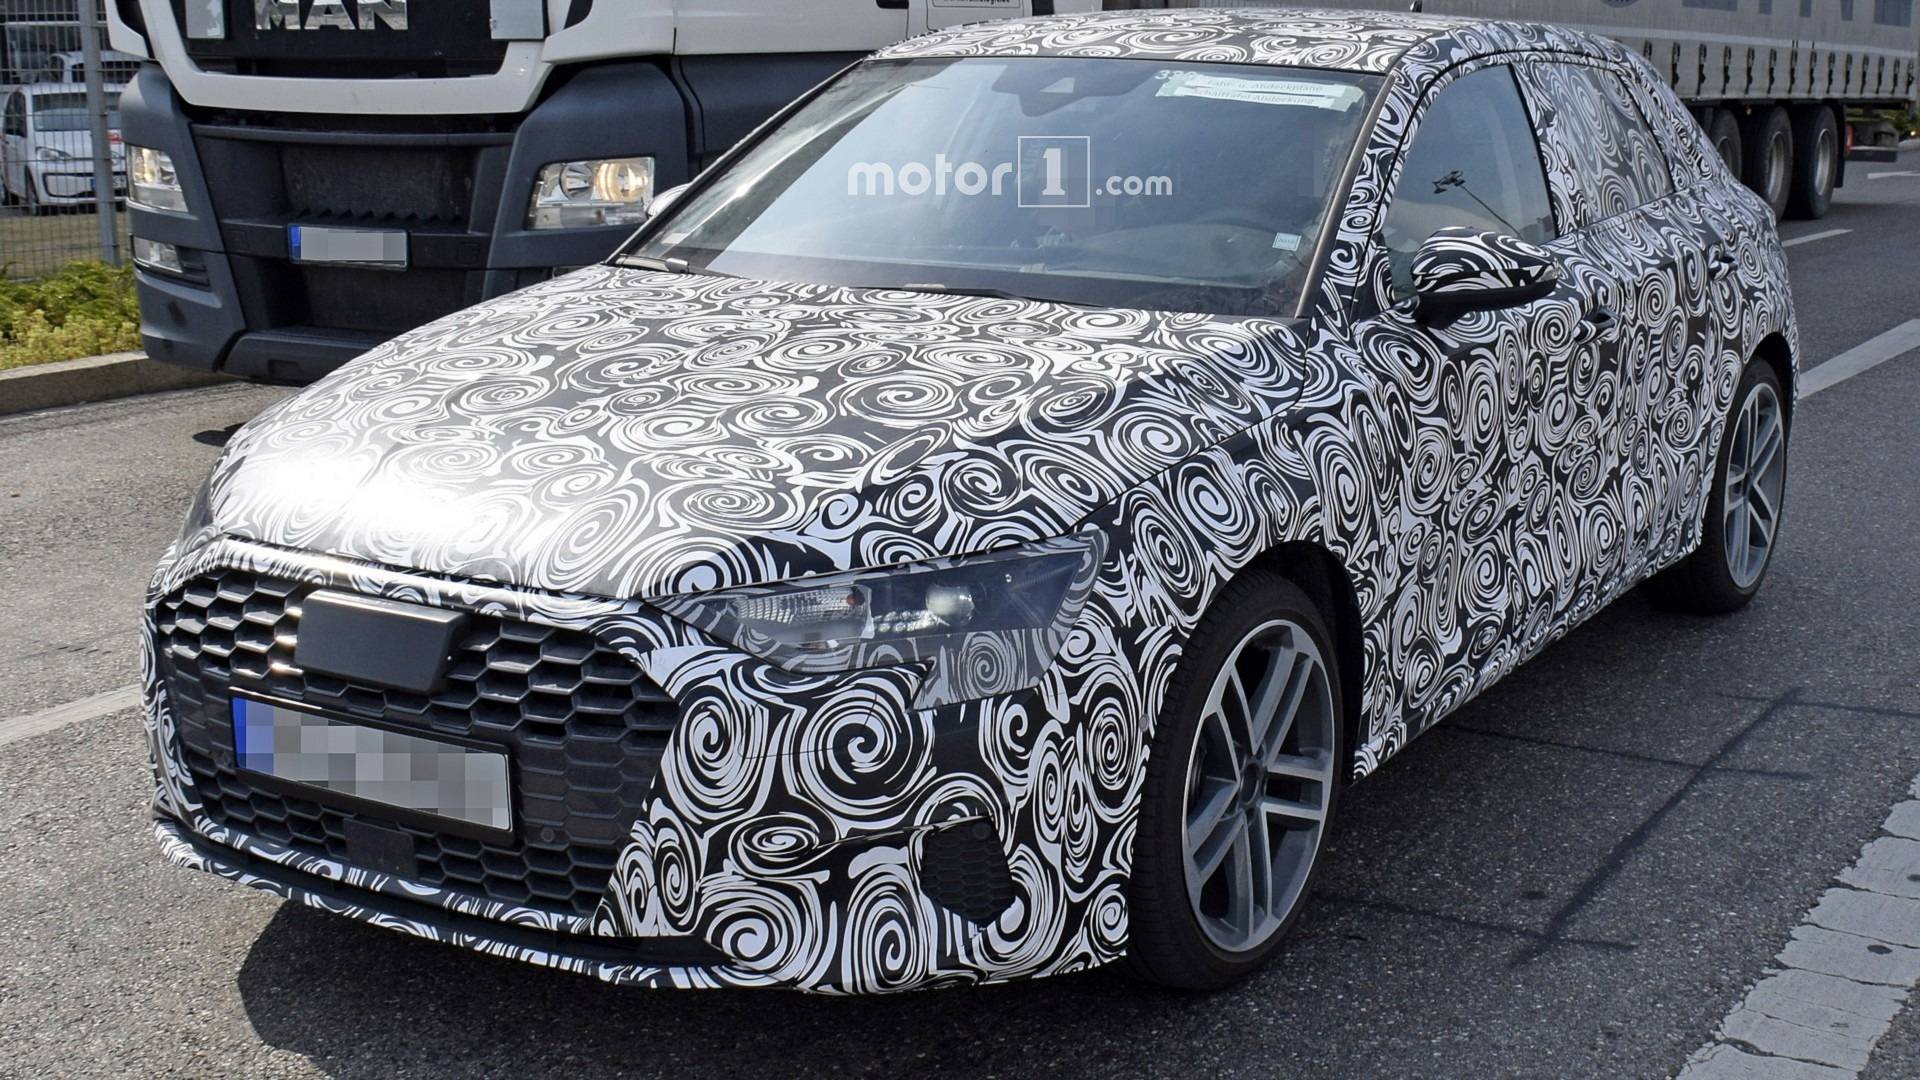 New Audi S3 Spied For The First Time [UPDATE: A3 Spotted]